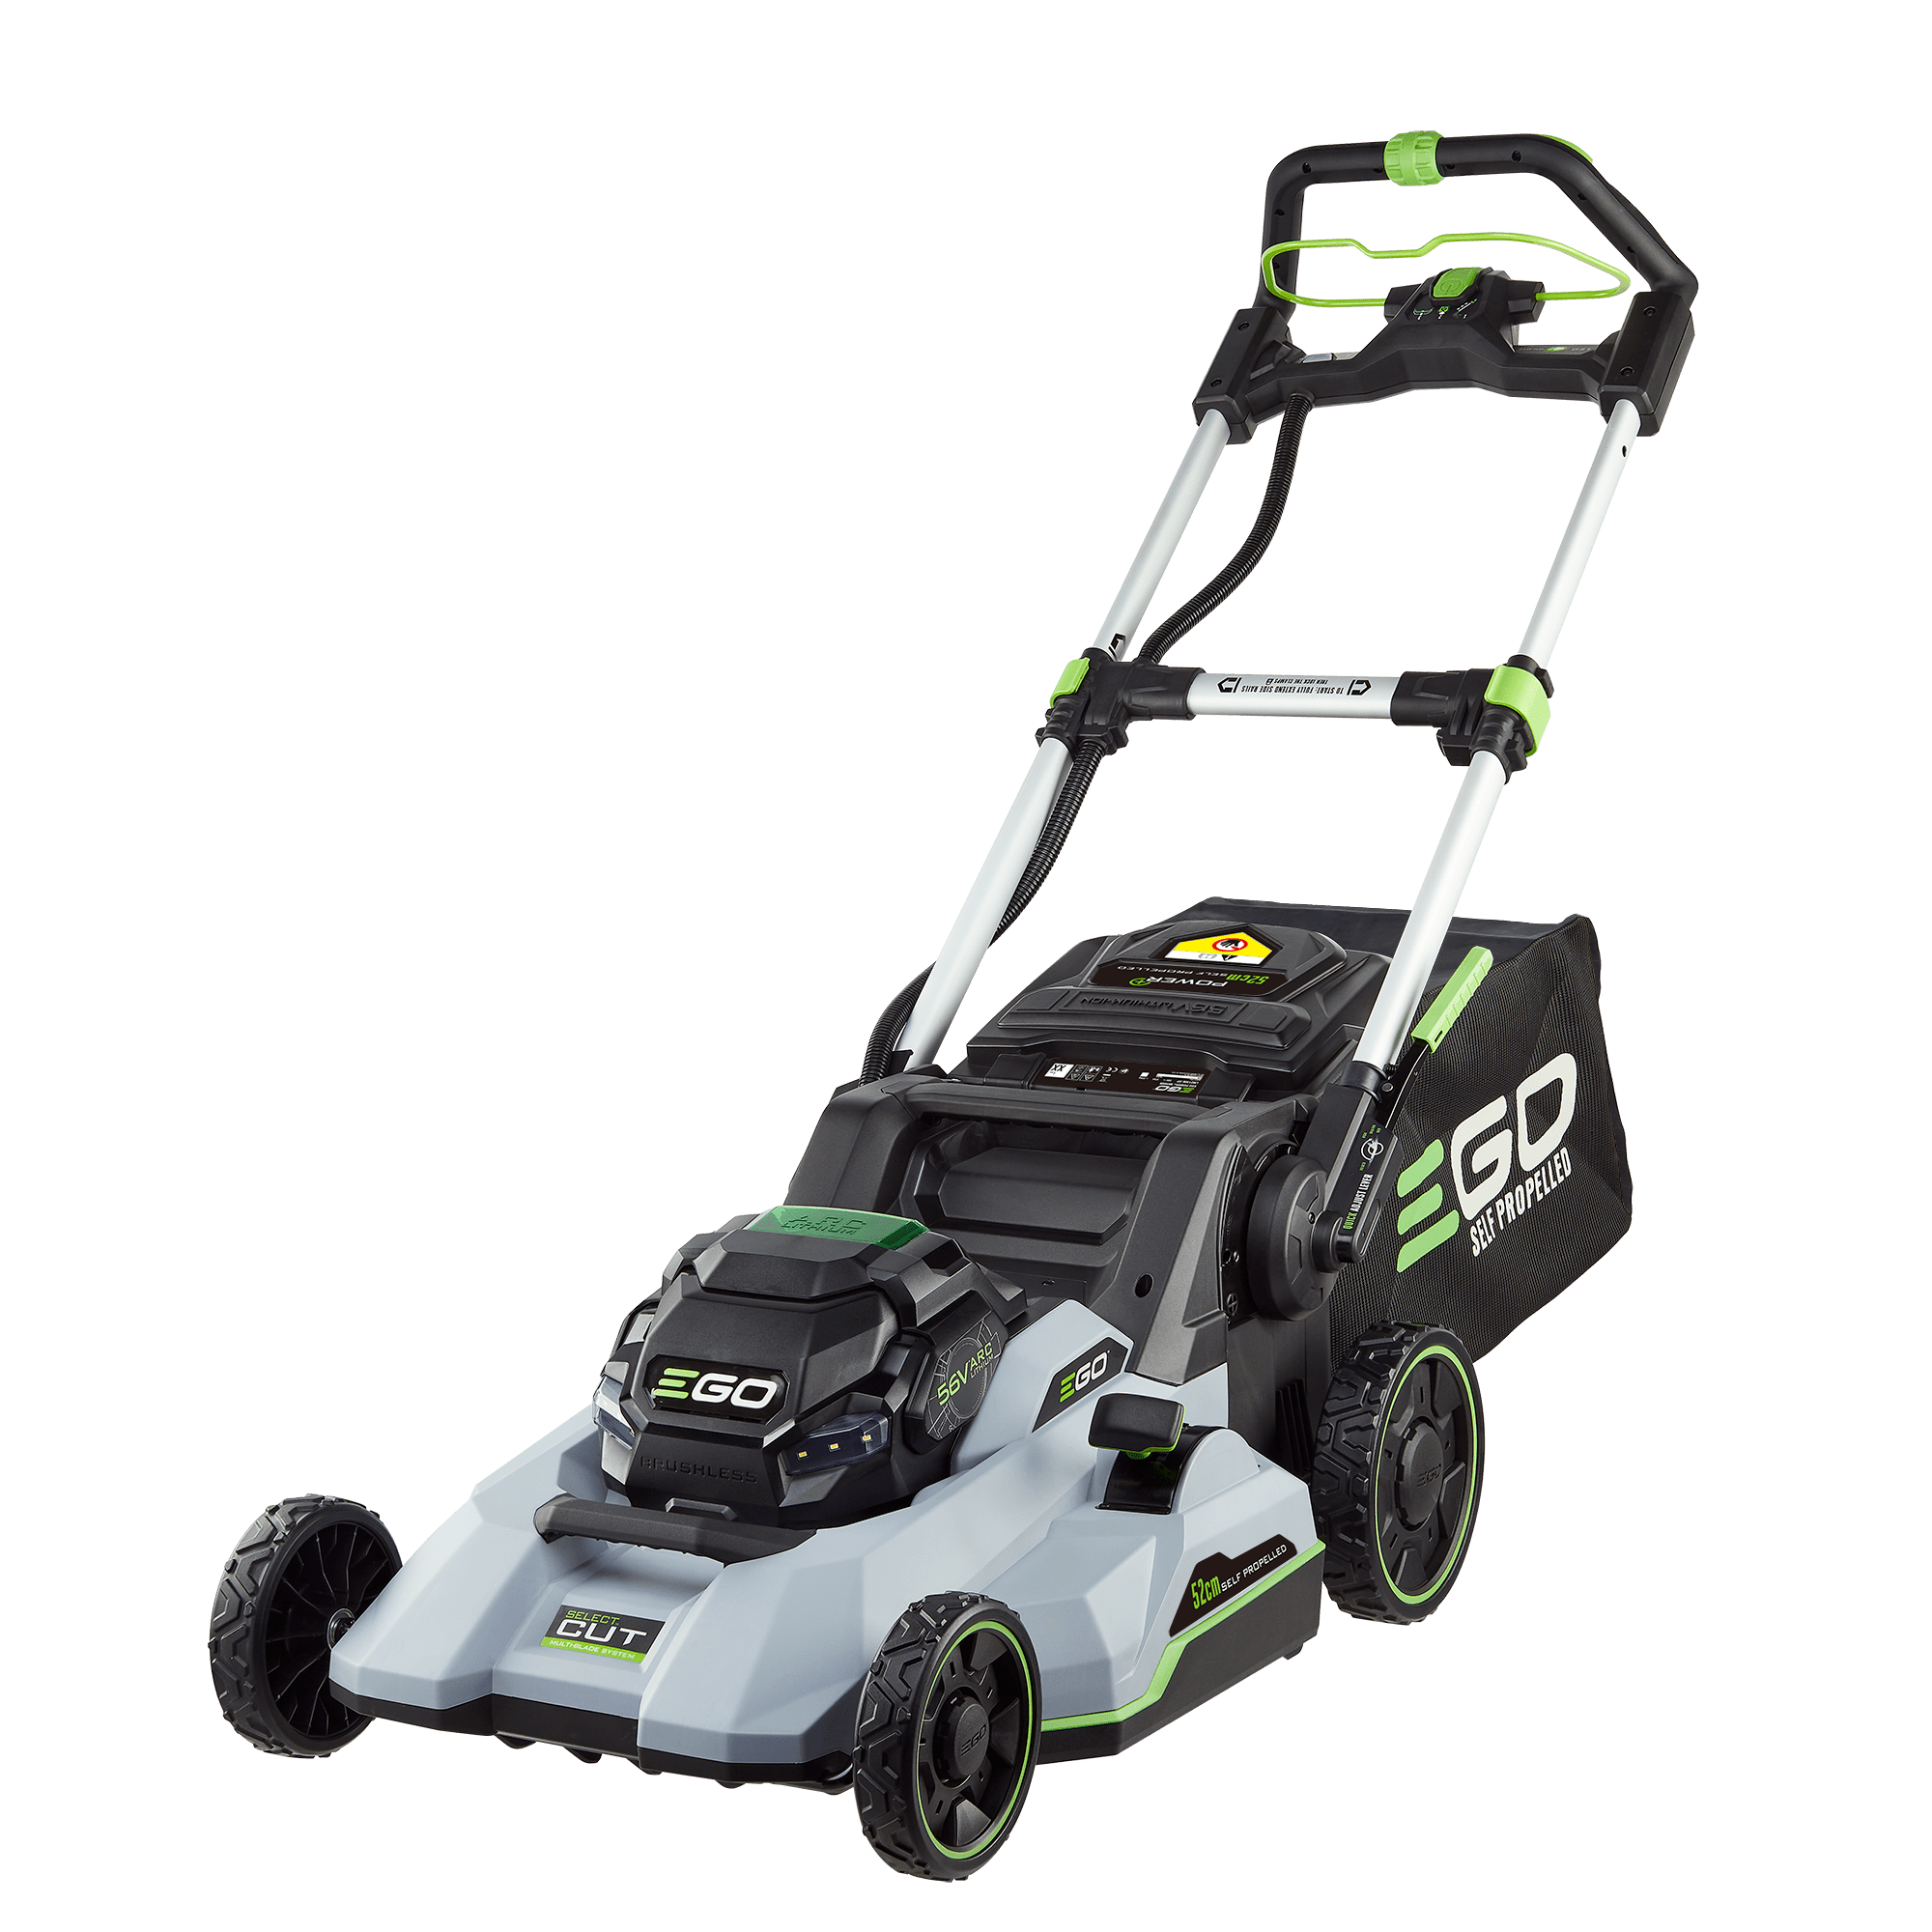 EGO LM2130E-SP 52cm Cordless Lawnmower (Bare Tool)